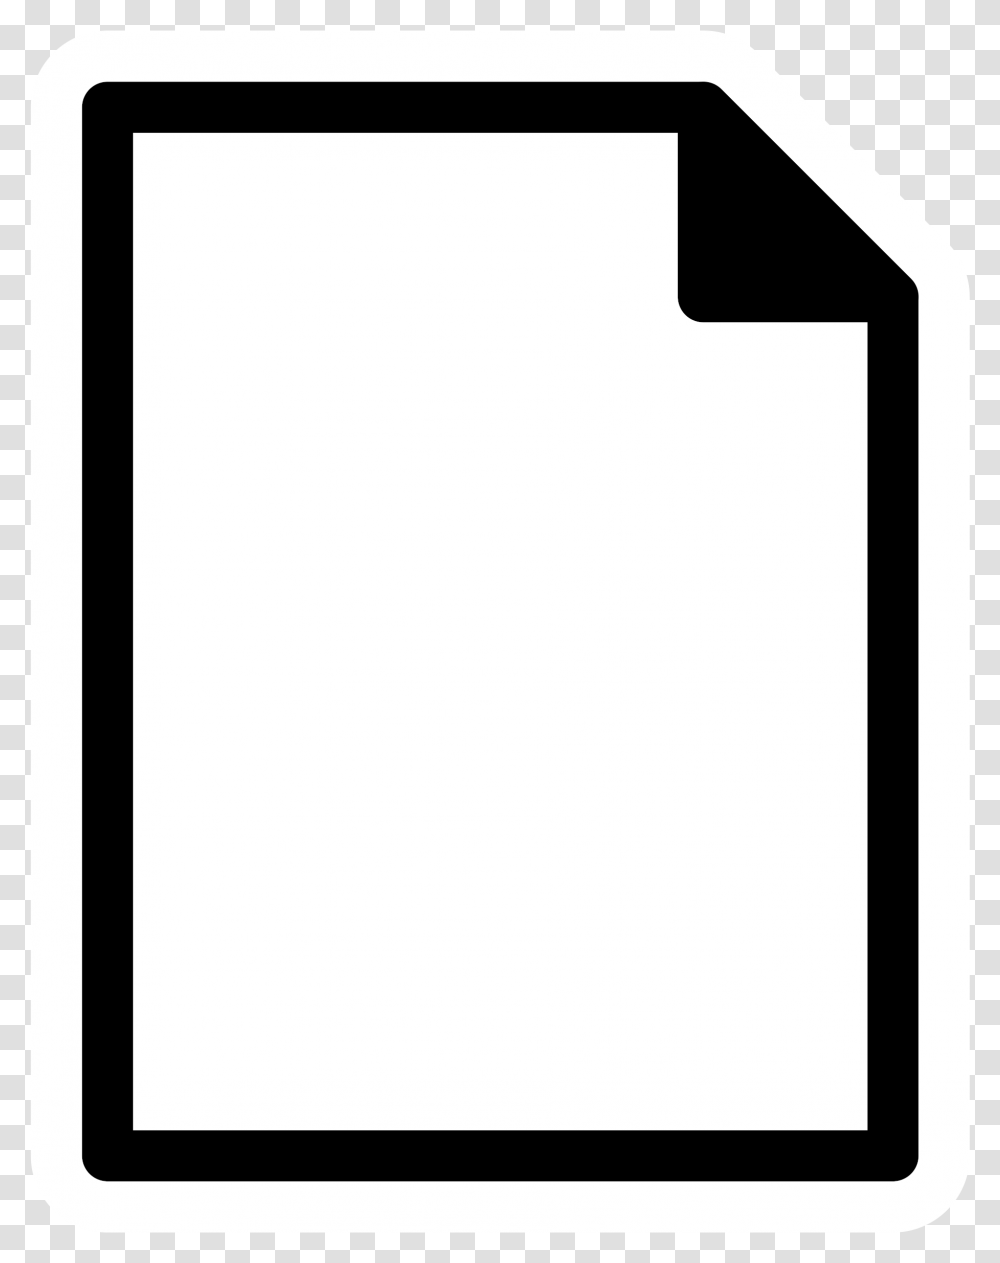 Primary Template Empty Clip Arts White Icon Worksheet, Cutlery, Dishwasher, Appliance Transparent Png